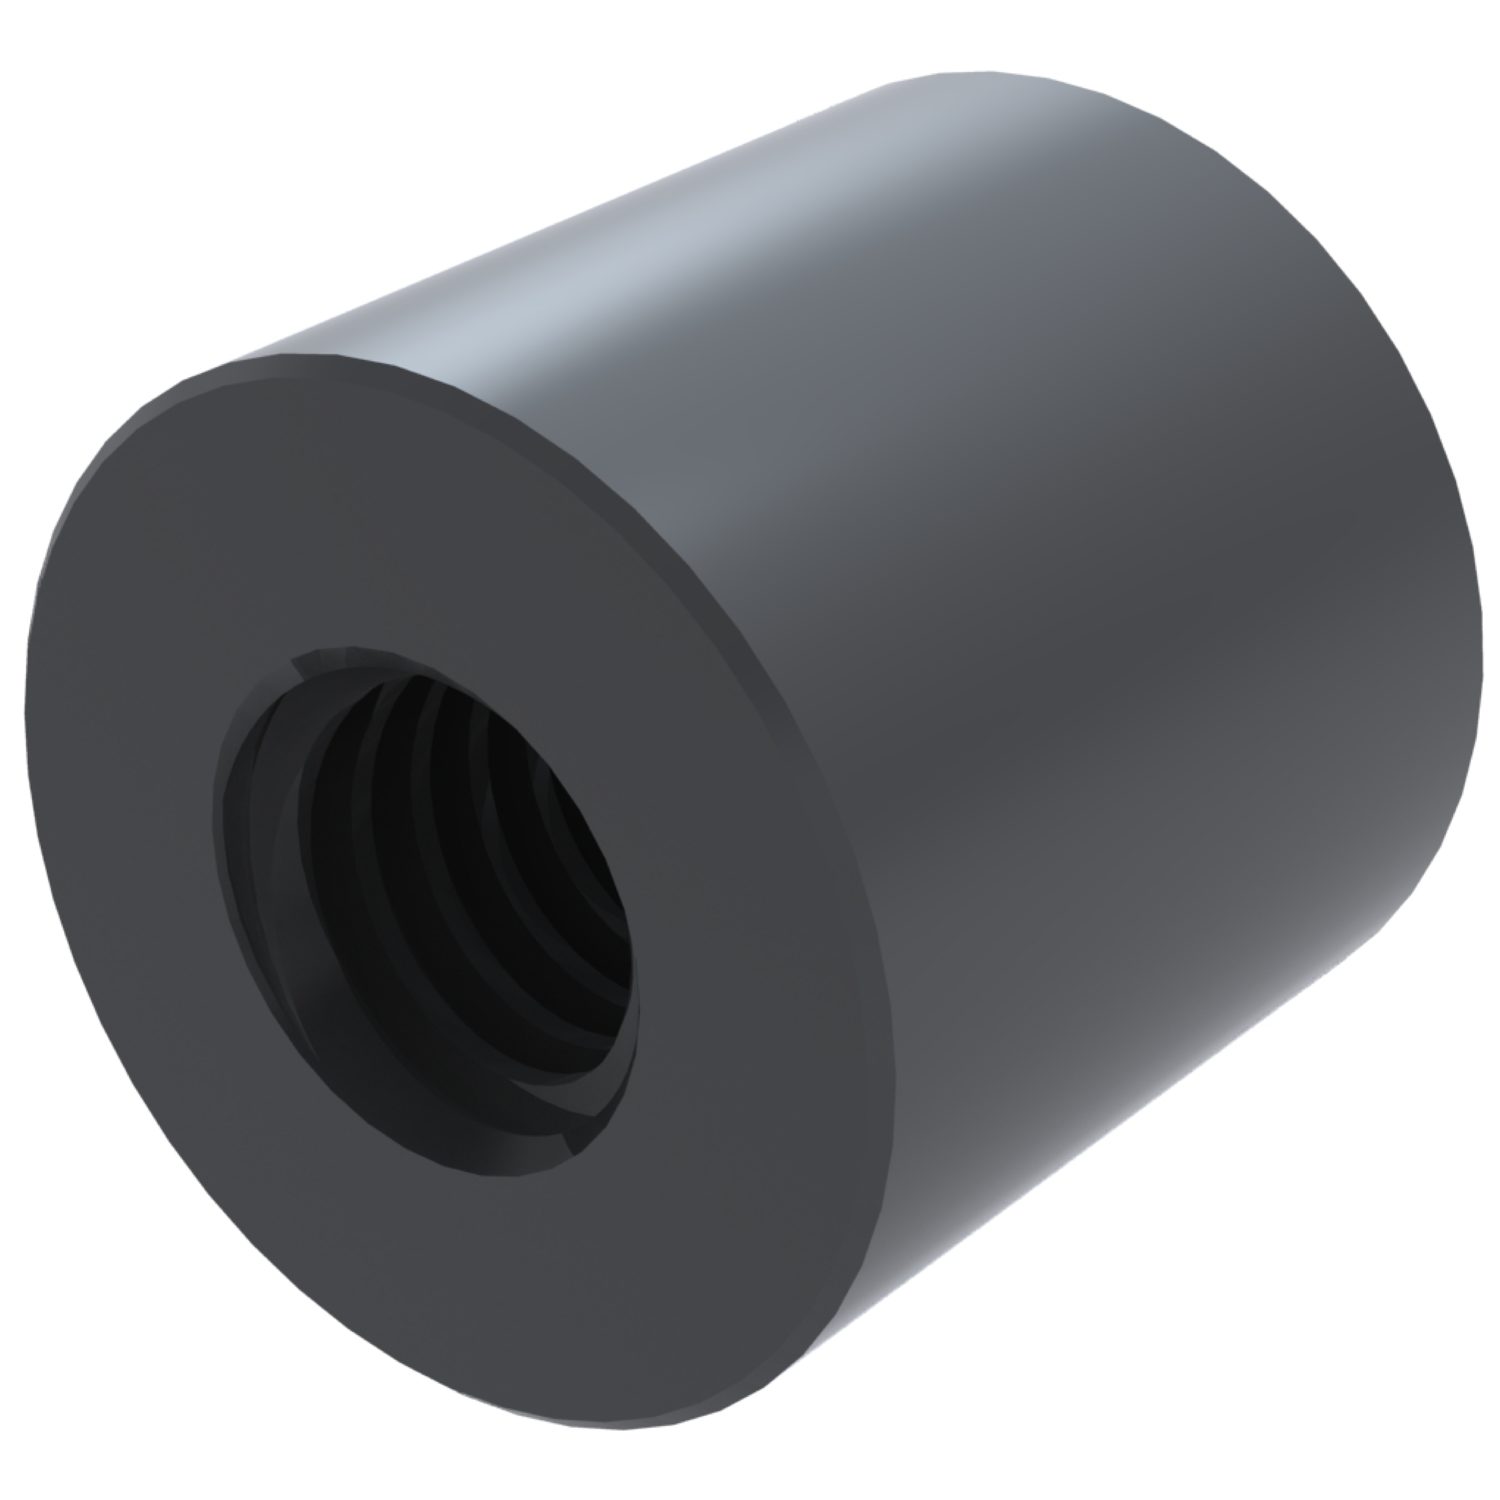 Cylindrical Nylon Nuts Can be used without lubrication for manual or powered control and medium/high speeds under moderate loads. Low noise.